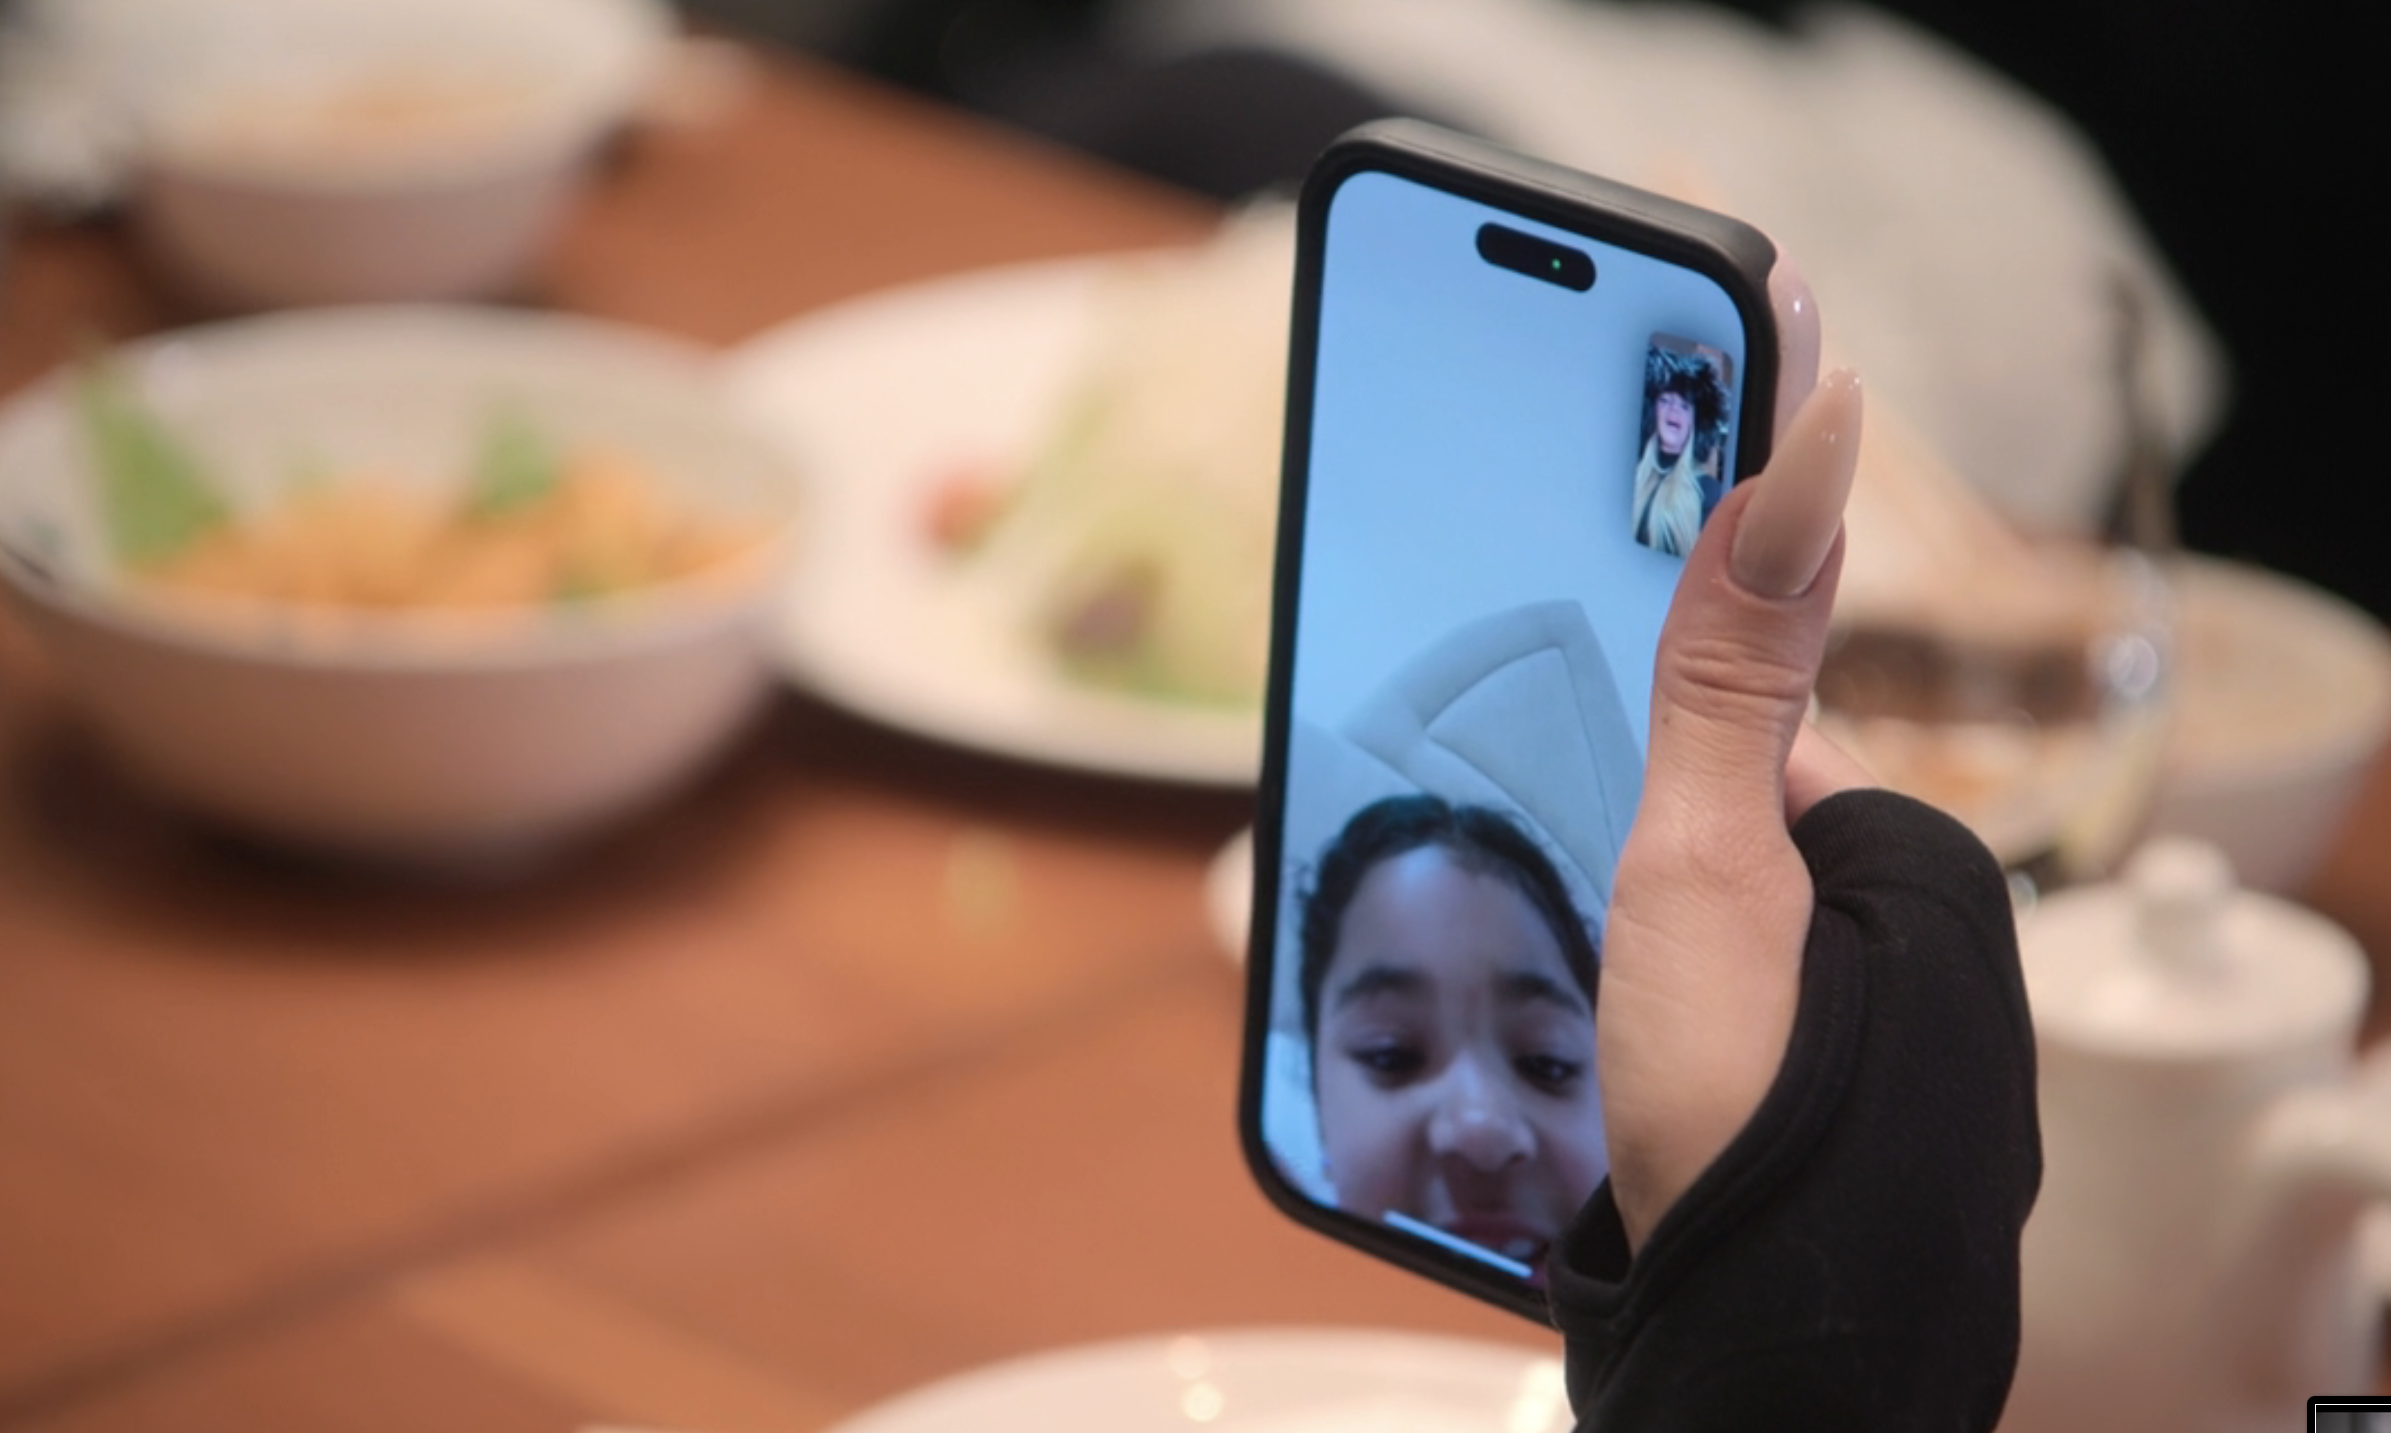 Close-up of a hand holding a phone showing a video call with two people. In the background, a dining table with several plates of food is visible